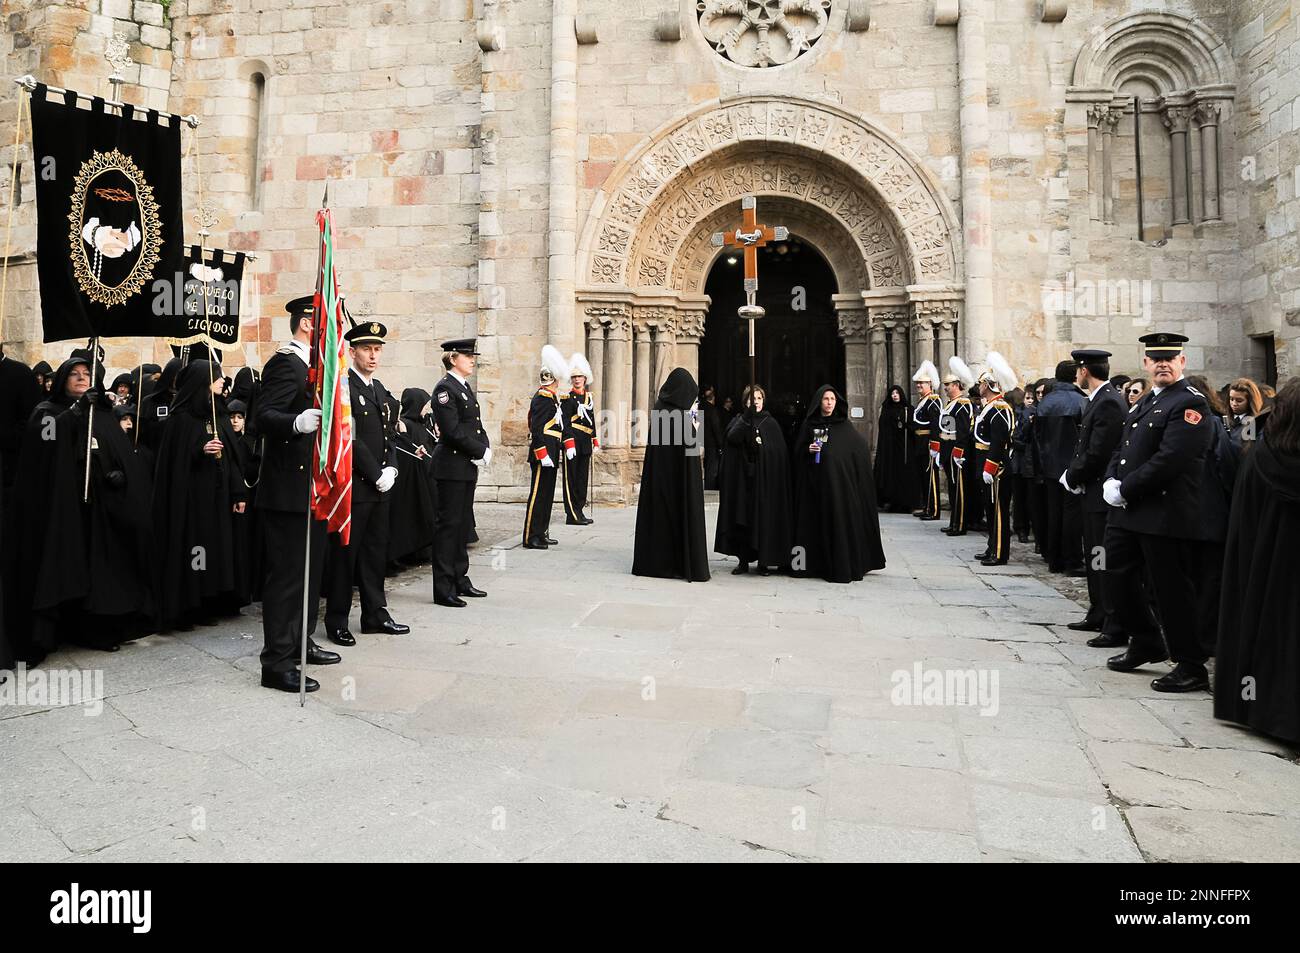 Holy Week in Zamora, Spain, procession of the Ladies of the Virgen de la Soledad leaving the church of Saint John. Stock Photo